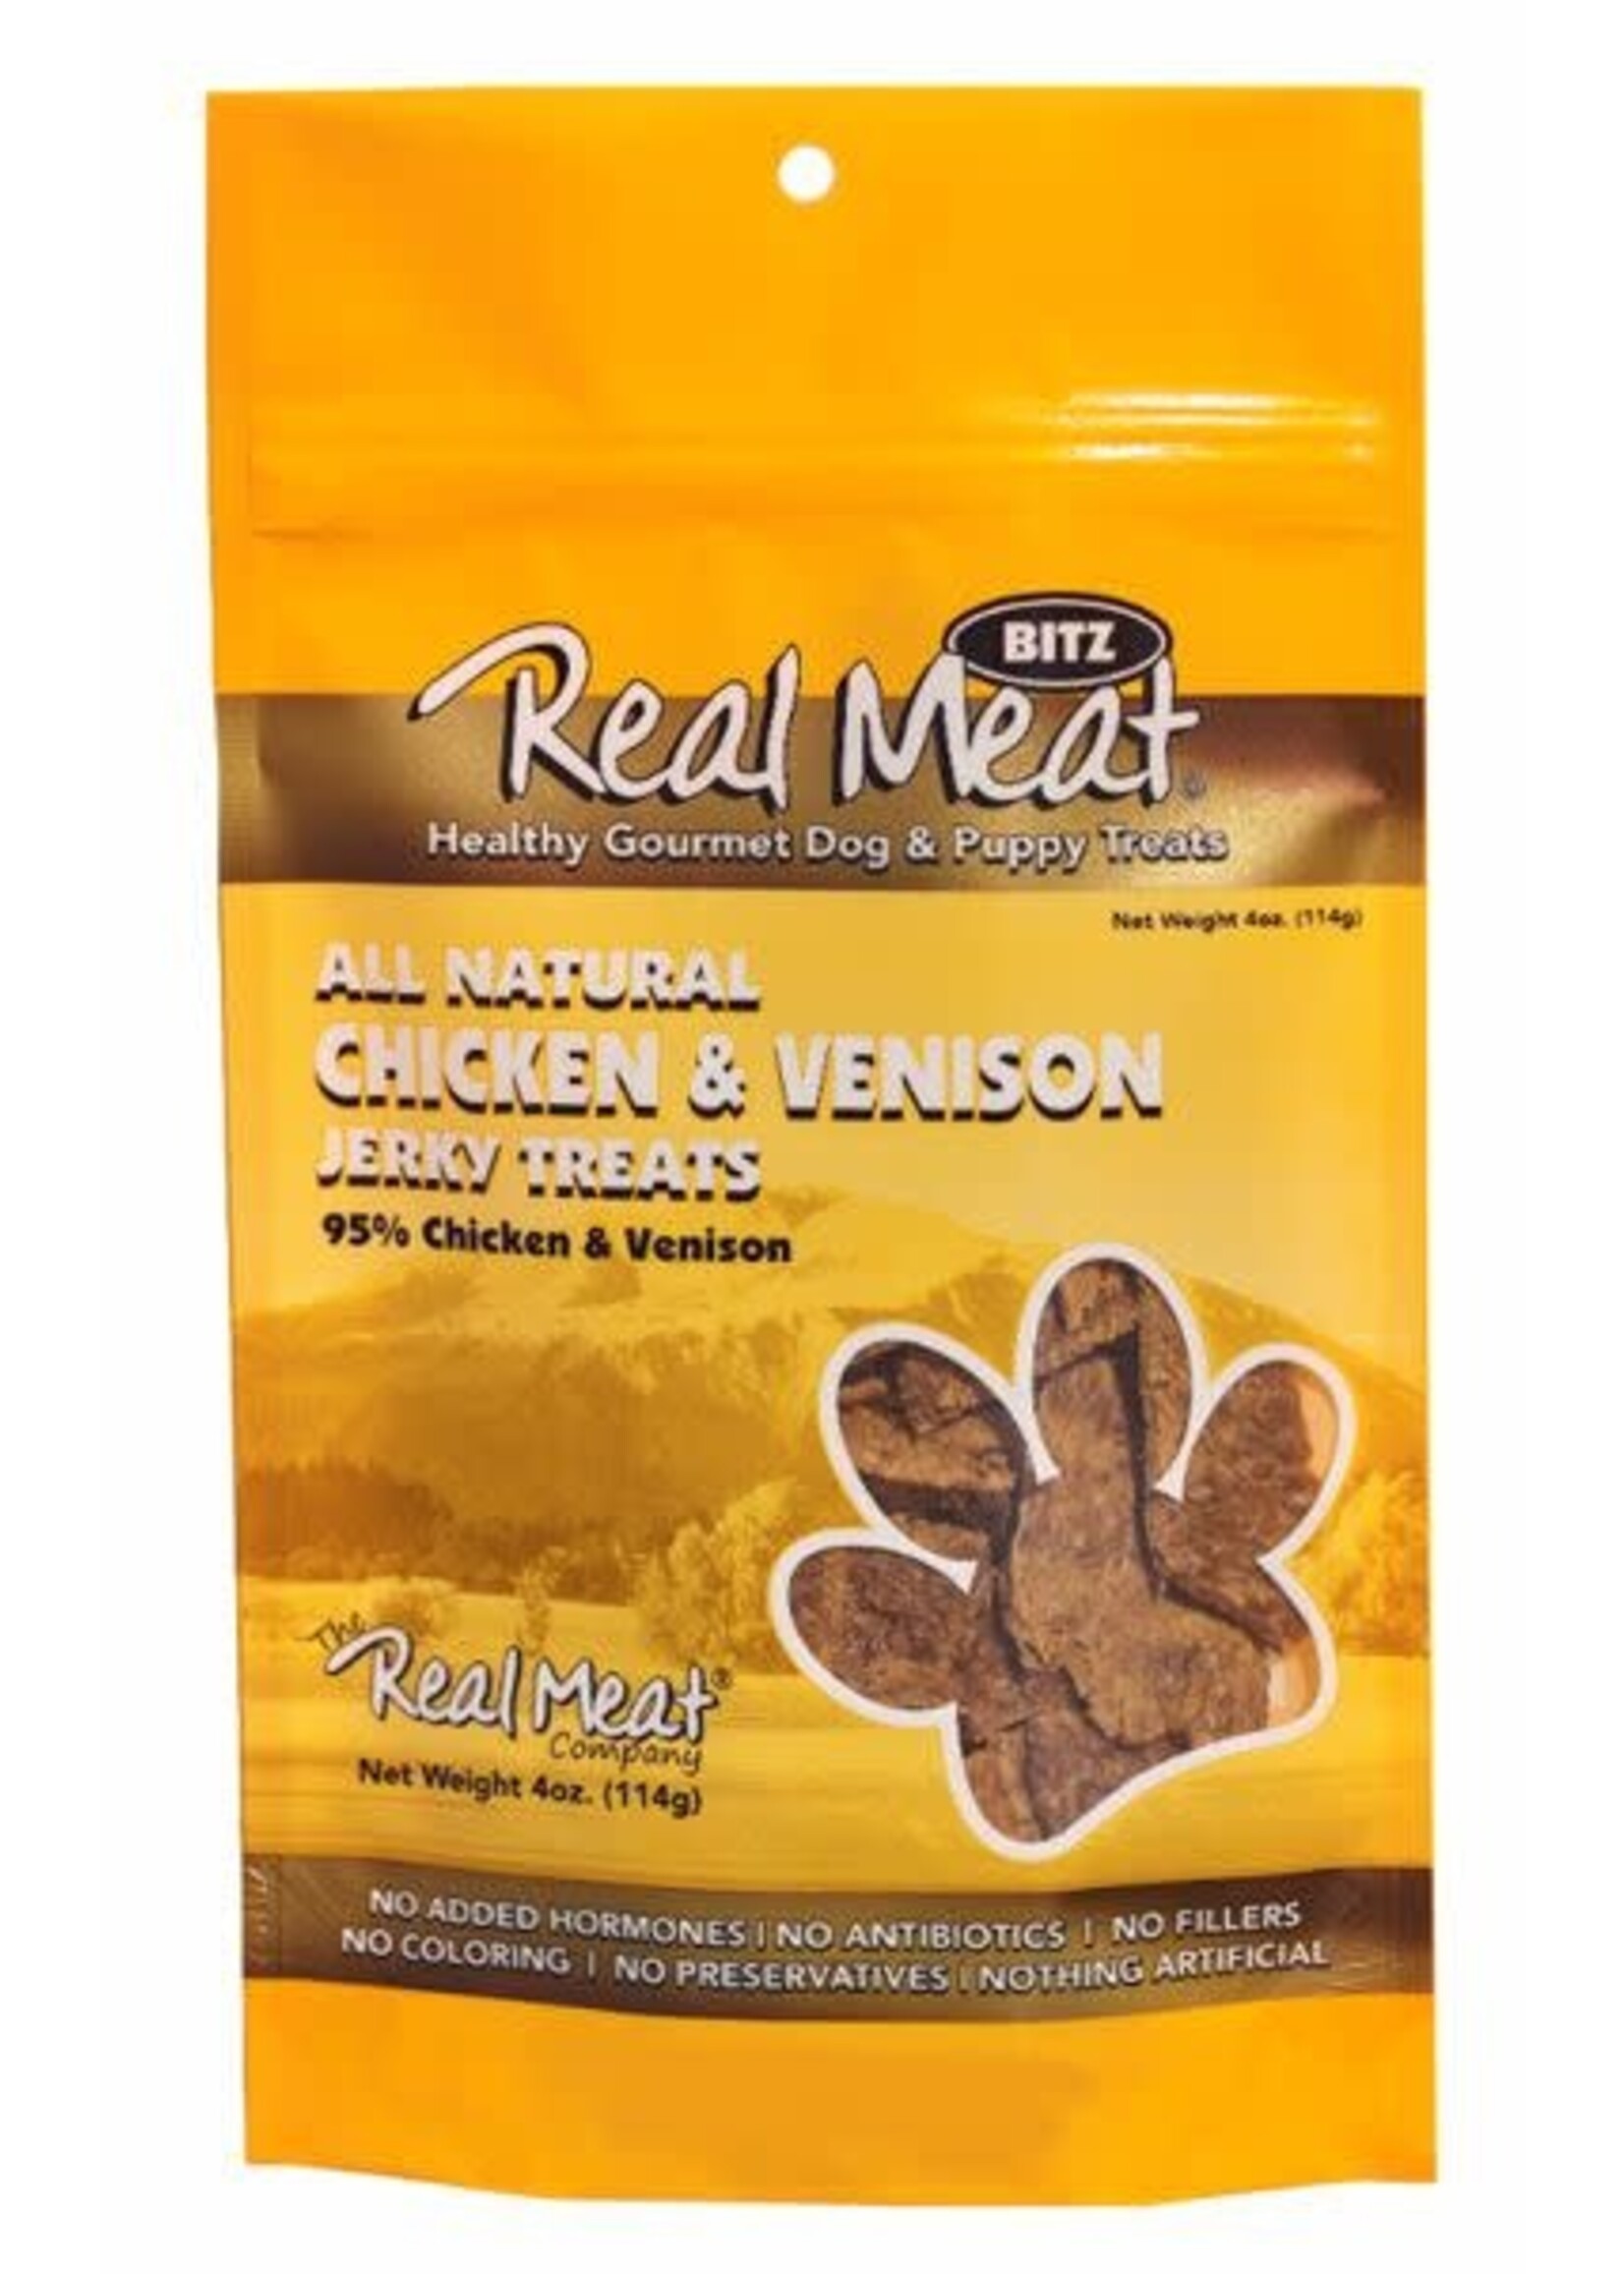 The Real Meat Company Real Meat Chicken & Venison Dog Jerky Treats